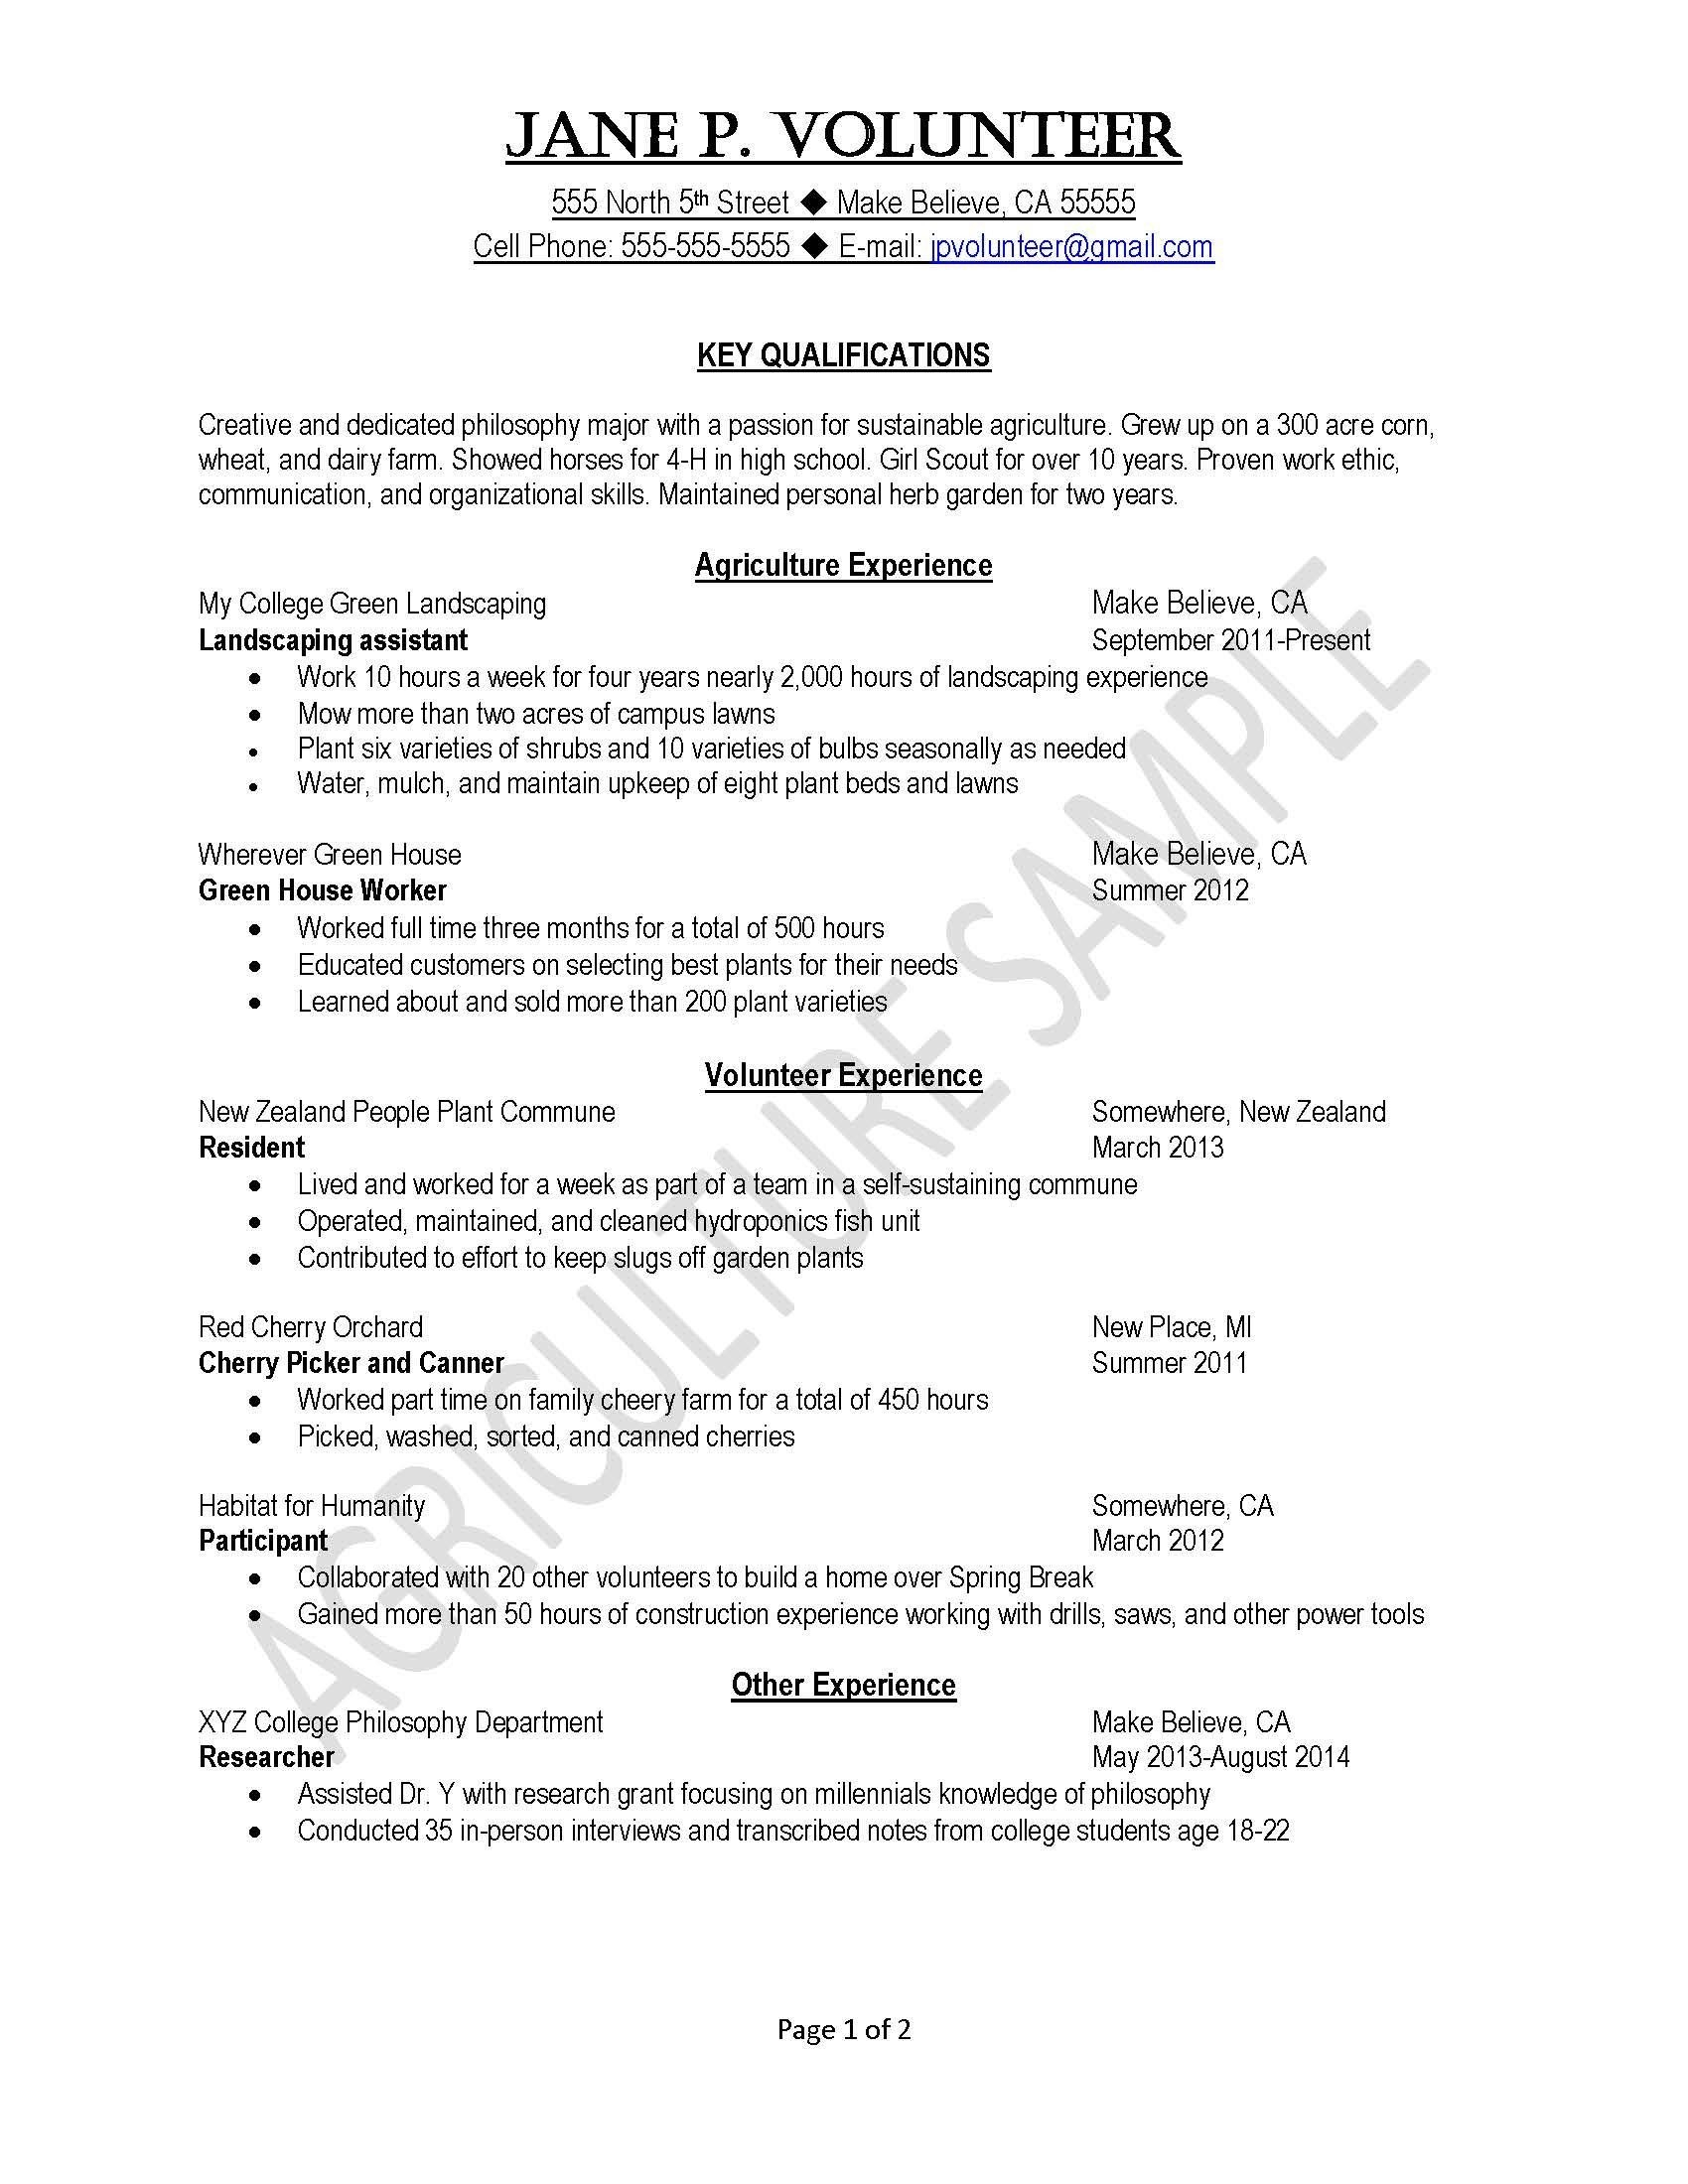 certified mail letter template example-Certified Resume Writer Lovely Awesome Sample College Application Resume Lovely Painter Resume 0d Certified Resume Related Post 18-k